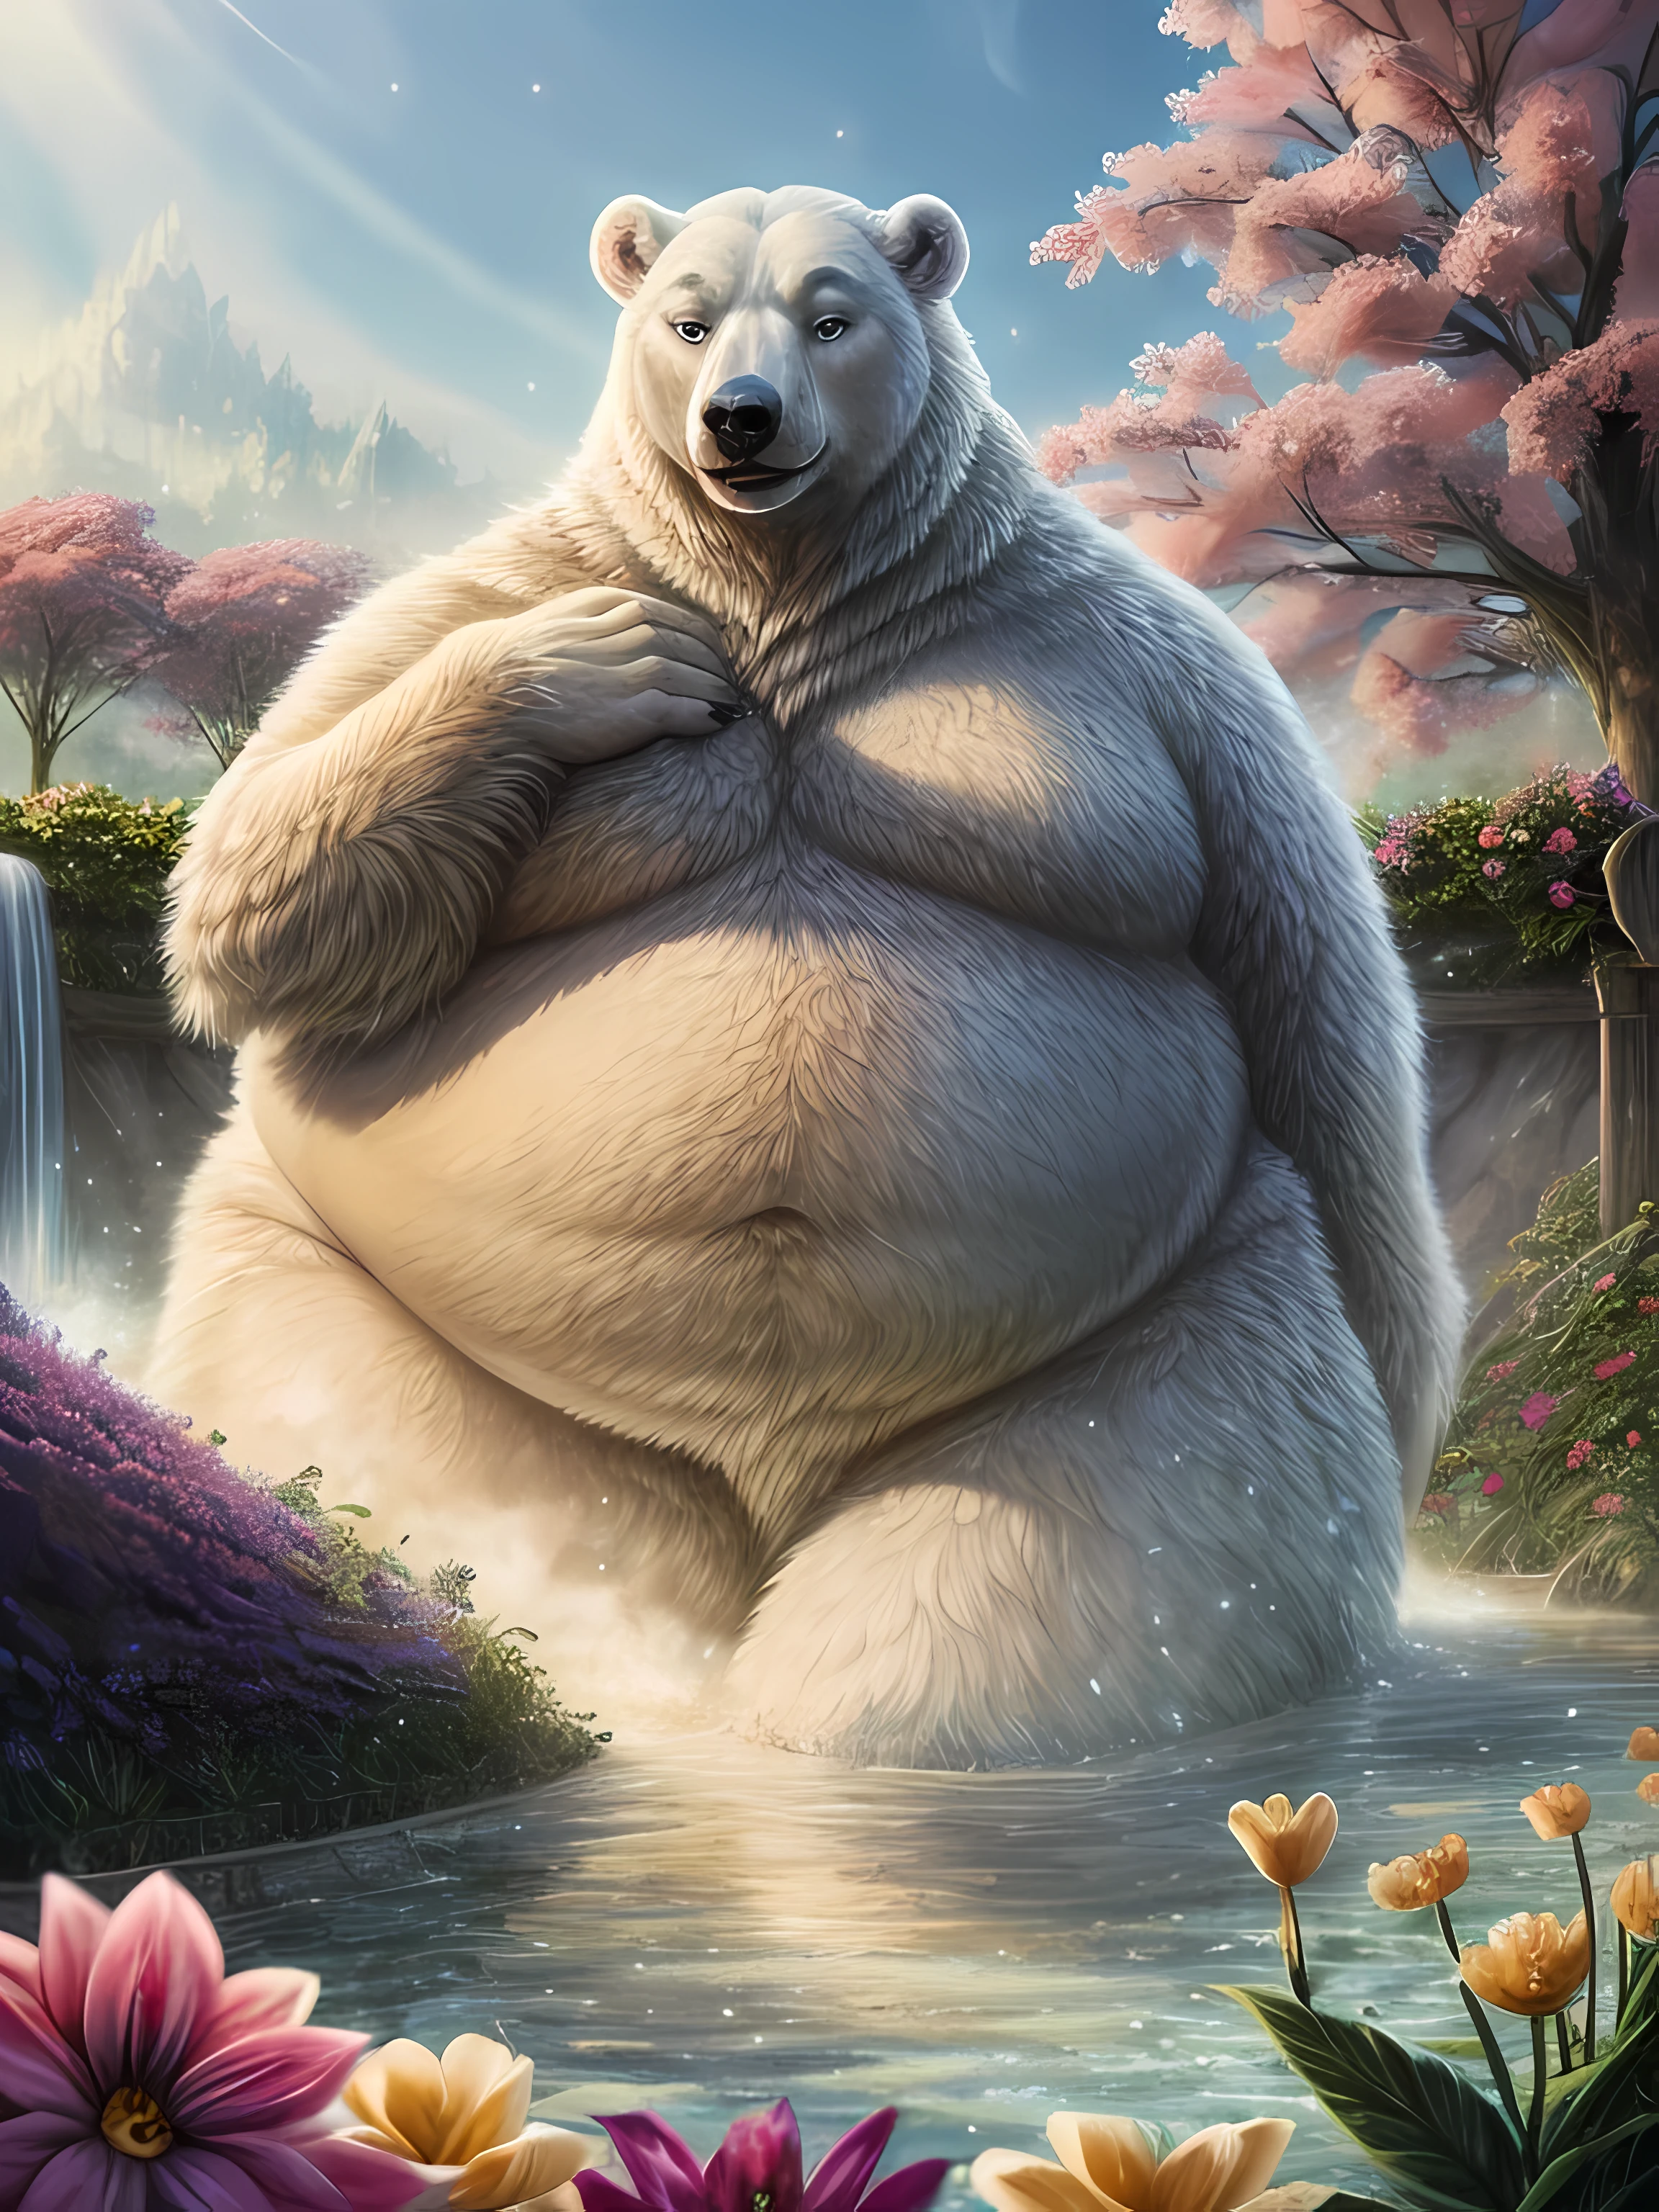 Obese, Overweight male, anthro, polar bear), Enchanting garden, blooming flowers, sparkling water, magical creatures, Intricate details, vibrant hues, dreamlike ambiance, beige, peach, soft blue, green, morning and fog, hyperrealistic, matte painting golden ratio, intricate, highly detailed,